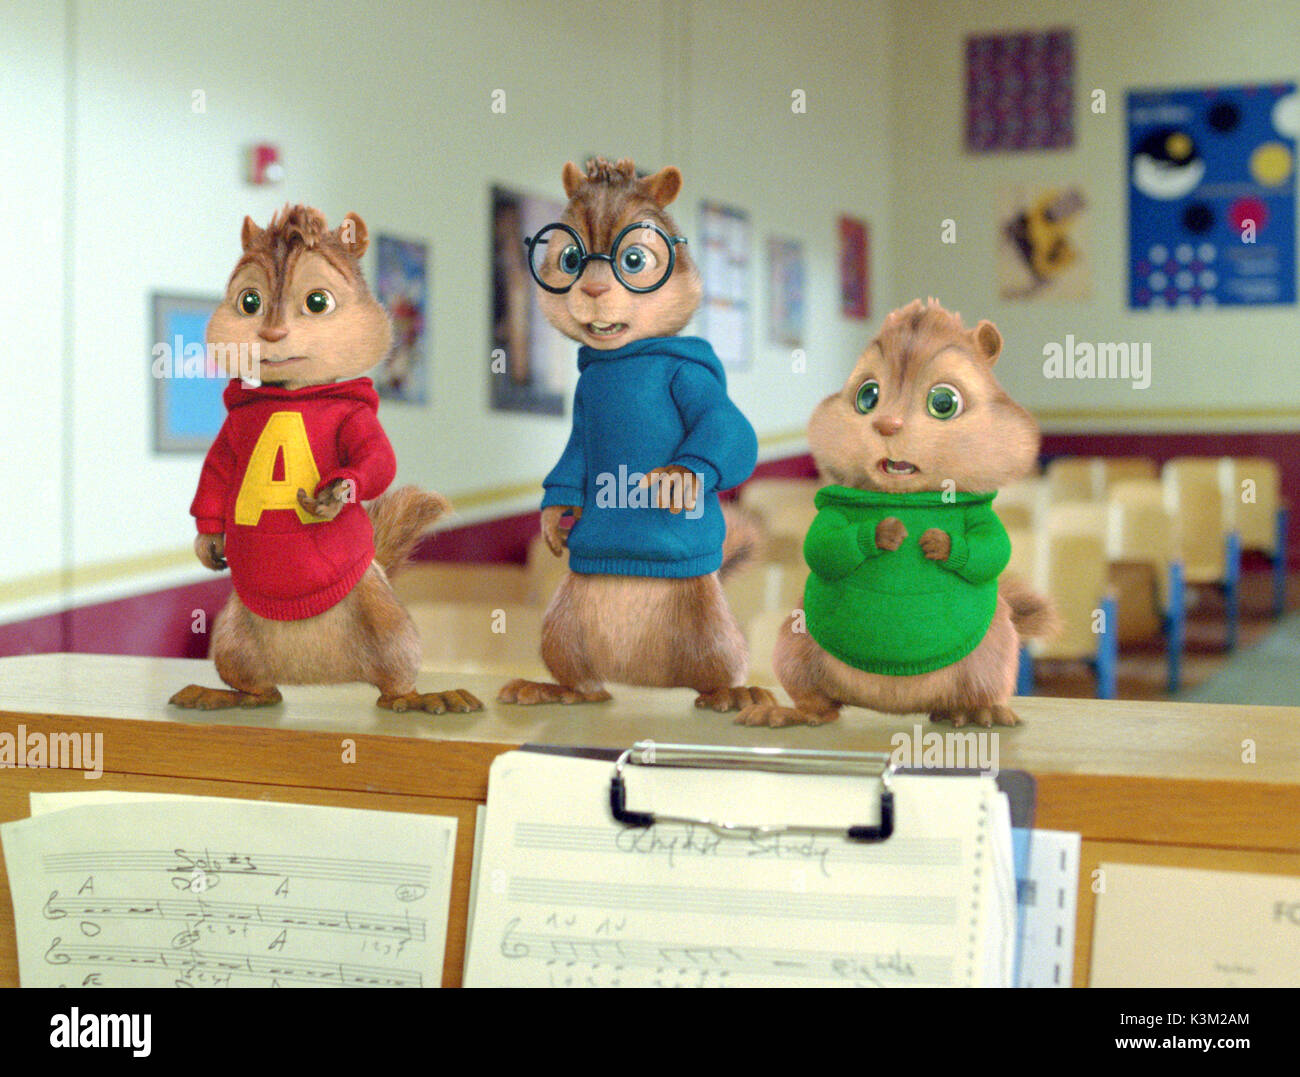 ALVIN AND THE CHIPMUNKS: THE SQUEAKUEL aka ALVIN AND THE CHIPMUNKS 2 JUSTIN LONG voices Alvin, MATTHEW GRAY GUBLER voices Simon, JESSE MCCARTNEY voices Theodore        Date: 2009 Stock Photo